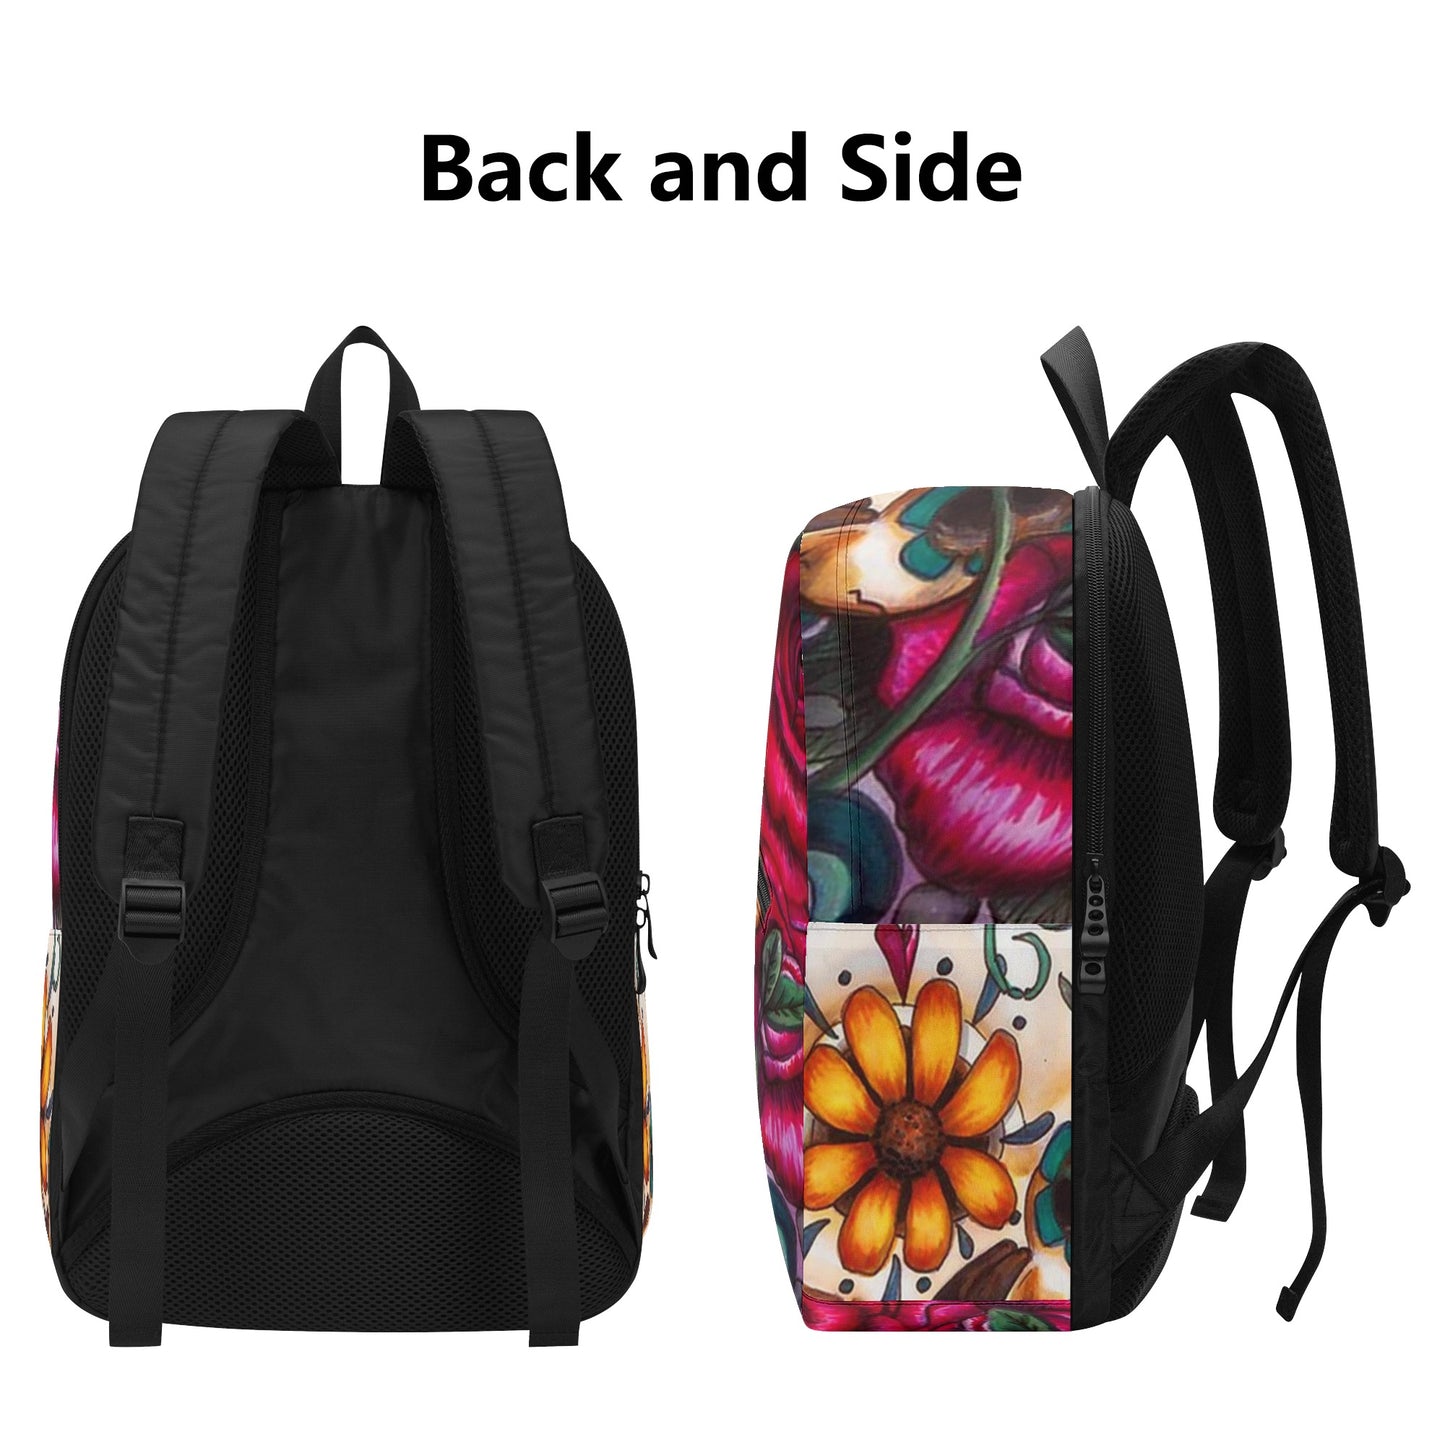 Sugar skull Day of the dead New Half Printing Laptop Backpack